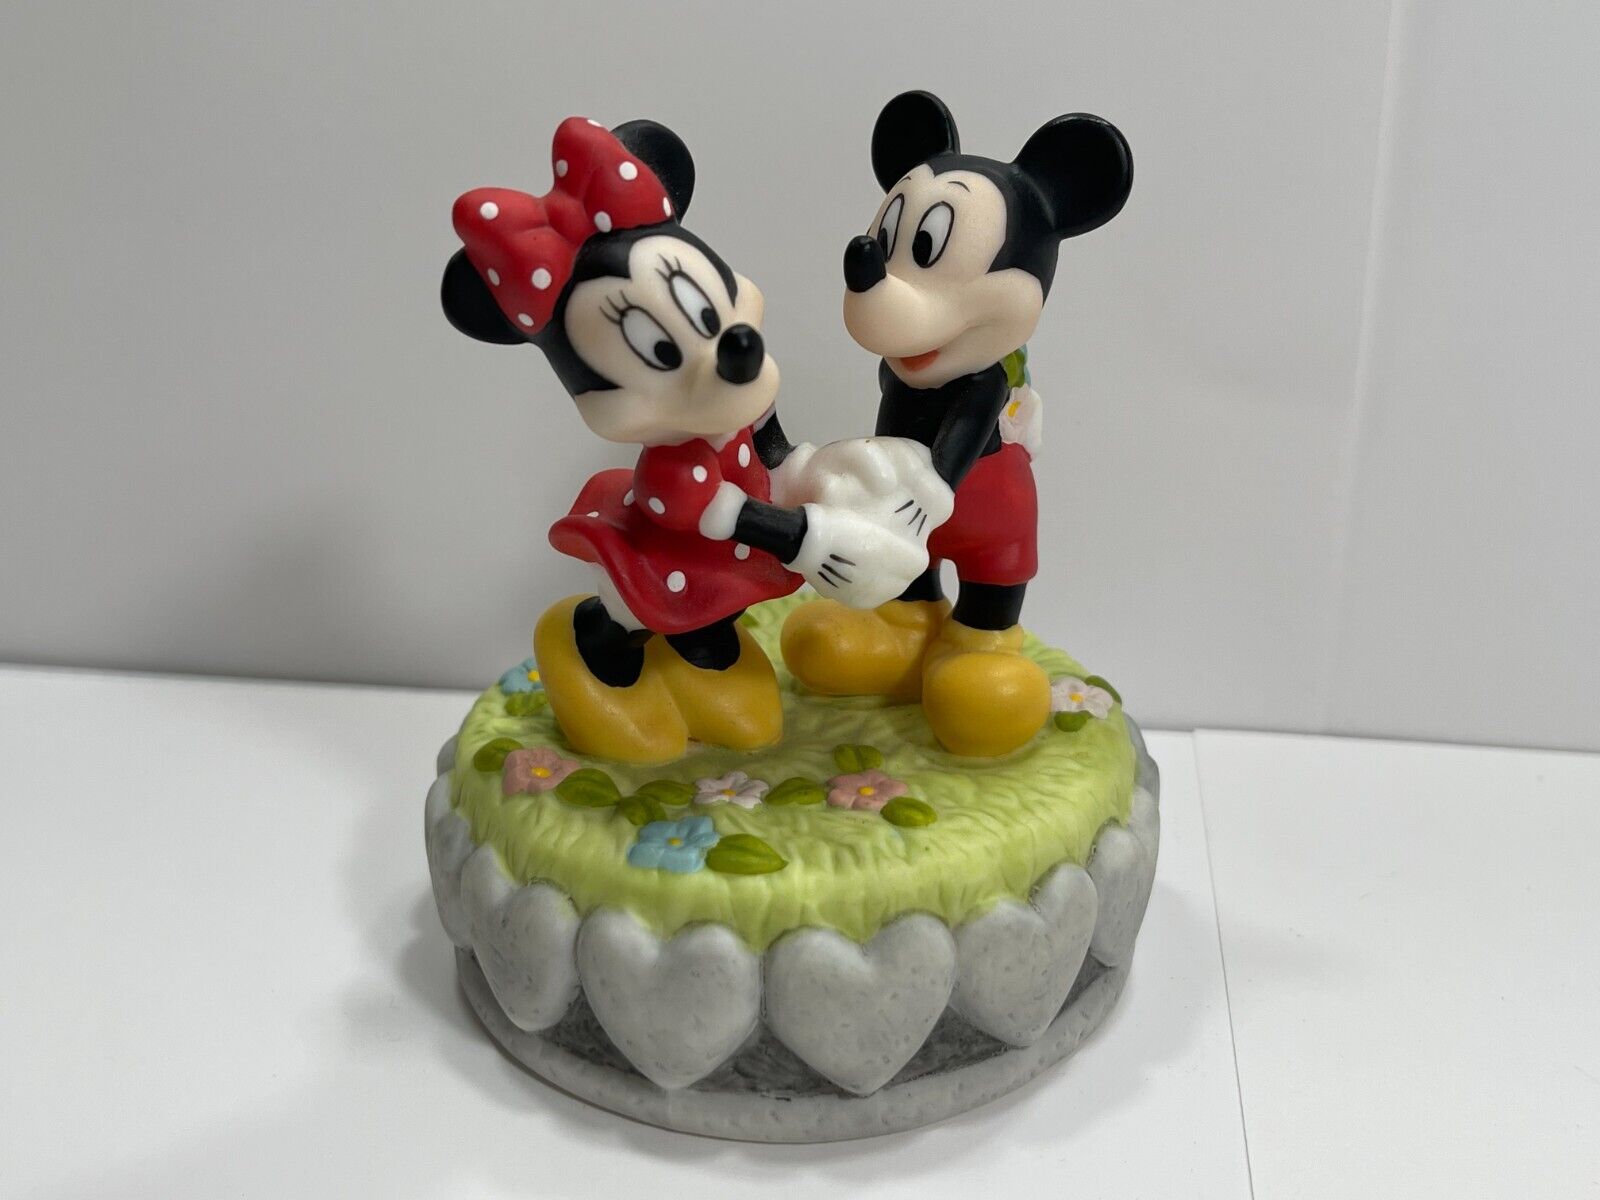 Vintage 1980s Walt Disney - Mickey Mouse & Minnie Mouse Music Box (Works)